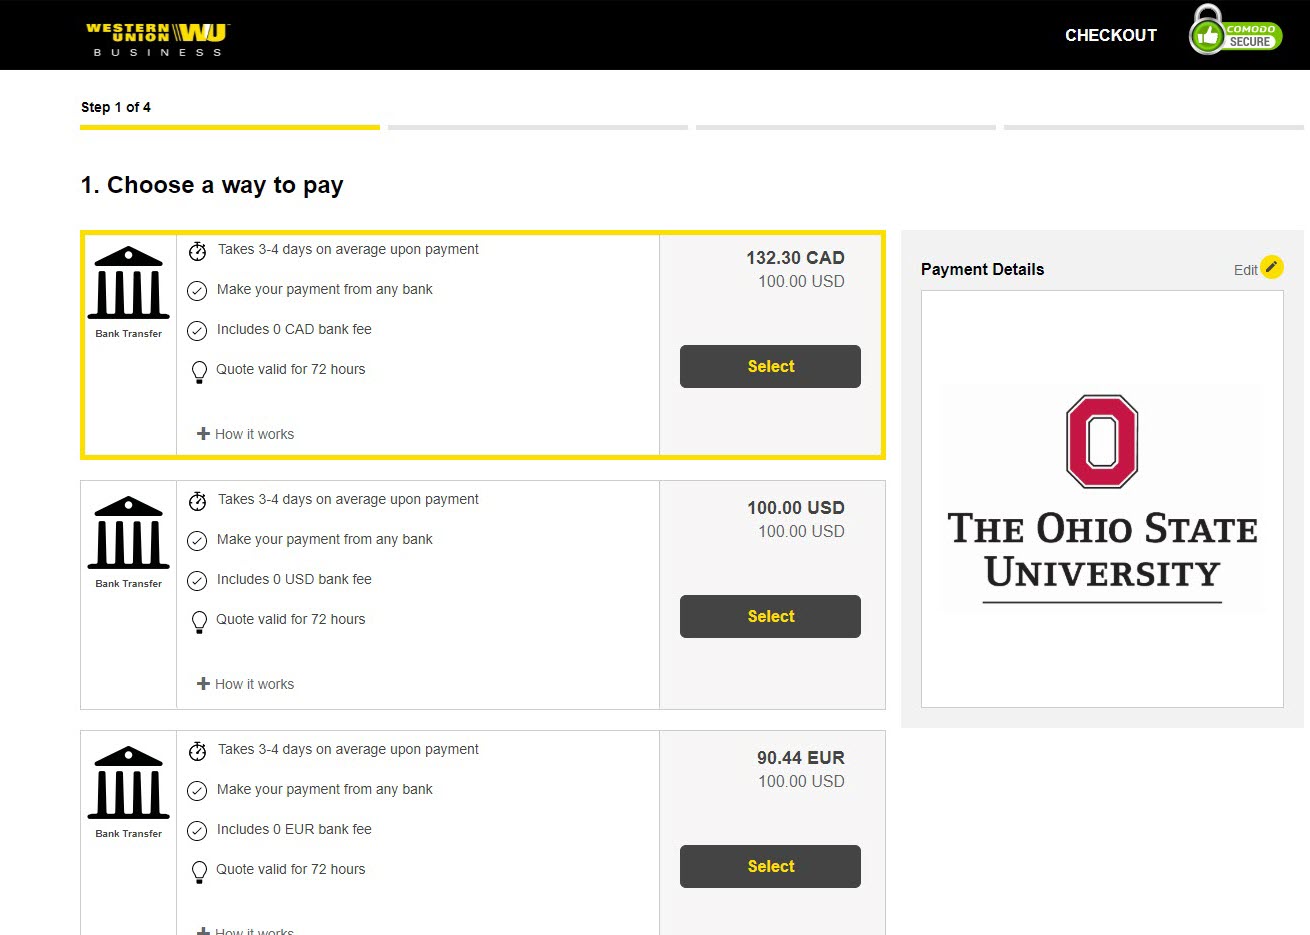 Step 1 of 4 o Choose a way to pay page of the get a quote process on The Ohio State University Western Union payment portal. Various bank transfer scenarios are displayed. in different currencies. Each option has a select button. 